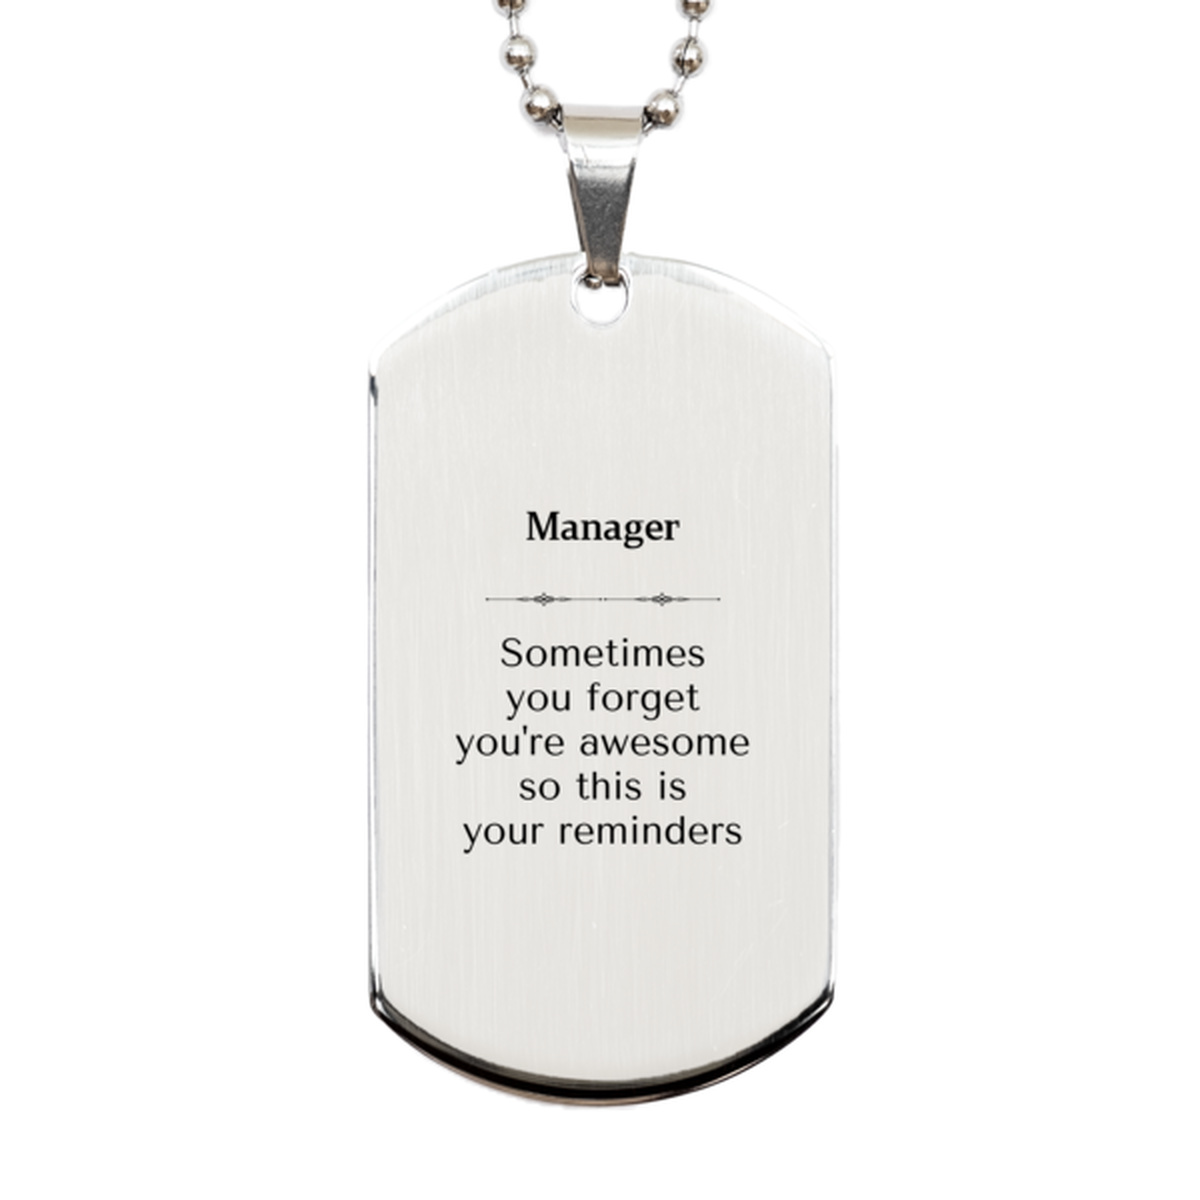 Sentimental Manager Silver Dog Tag, Manager Sometimes you forget you're awesome so this is your reminders, Graduation Christmas Birthday Gifts for Manager, Men, Women, Coworkers